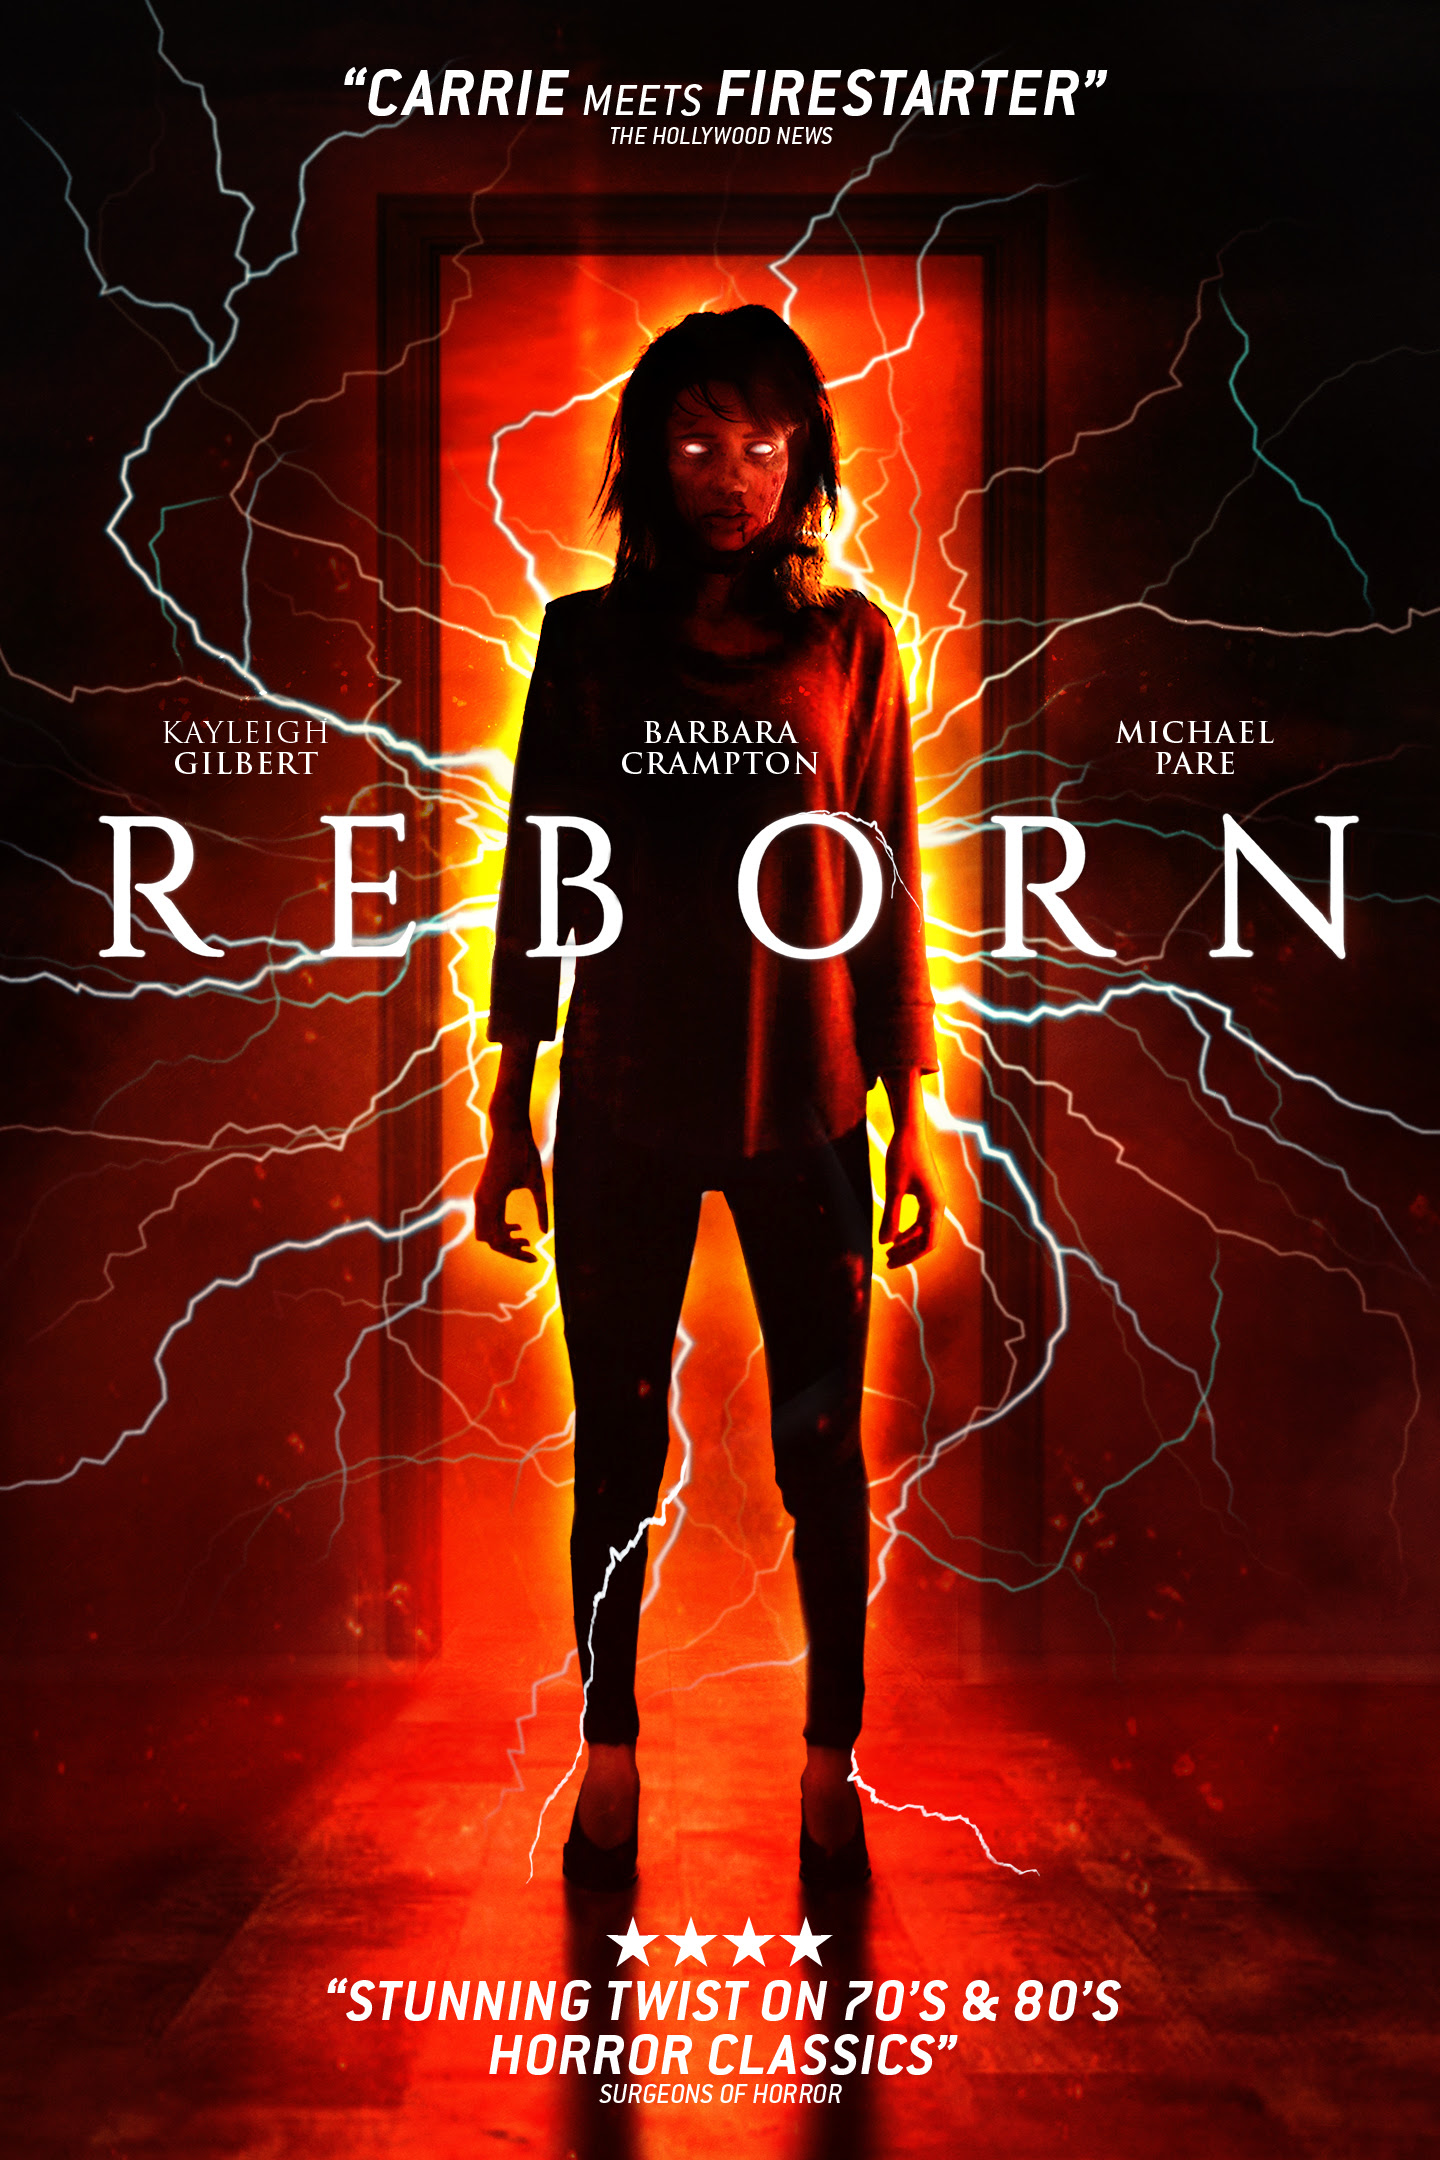 Reborn review: Spark raving mad